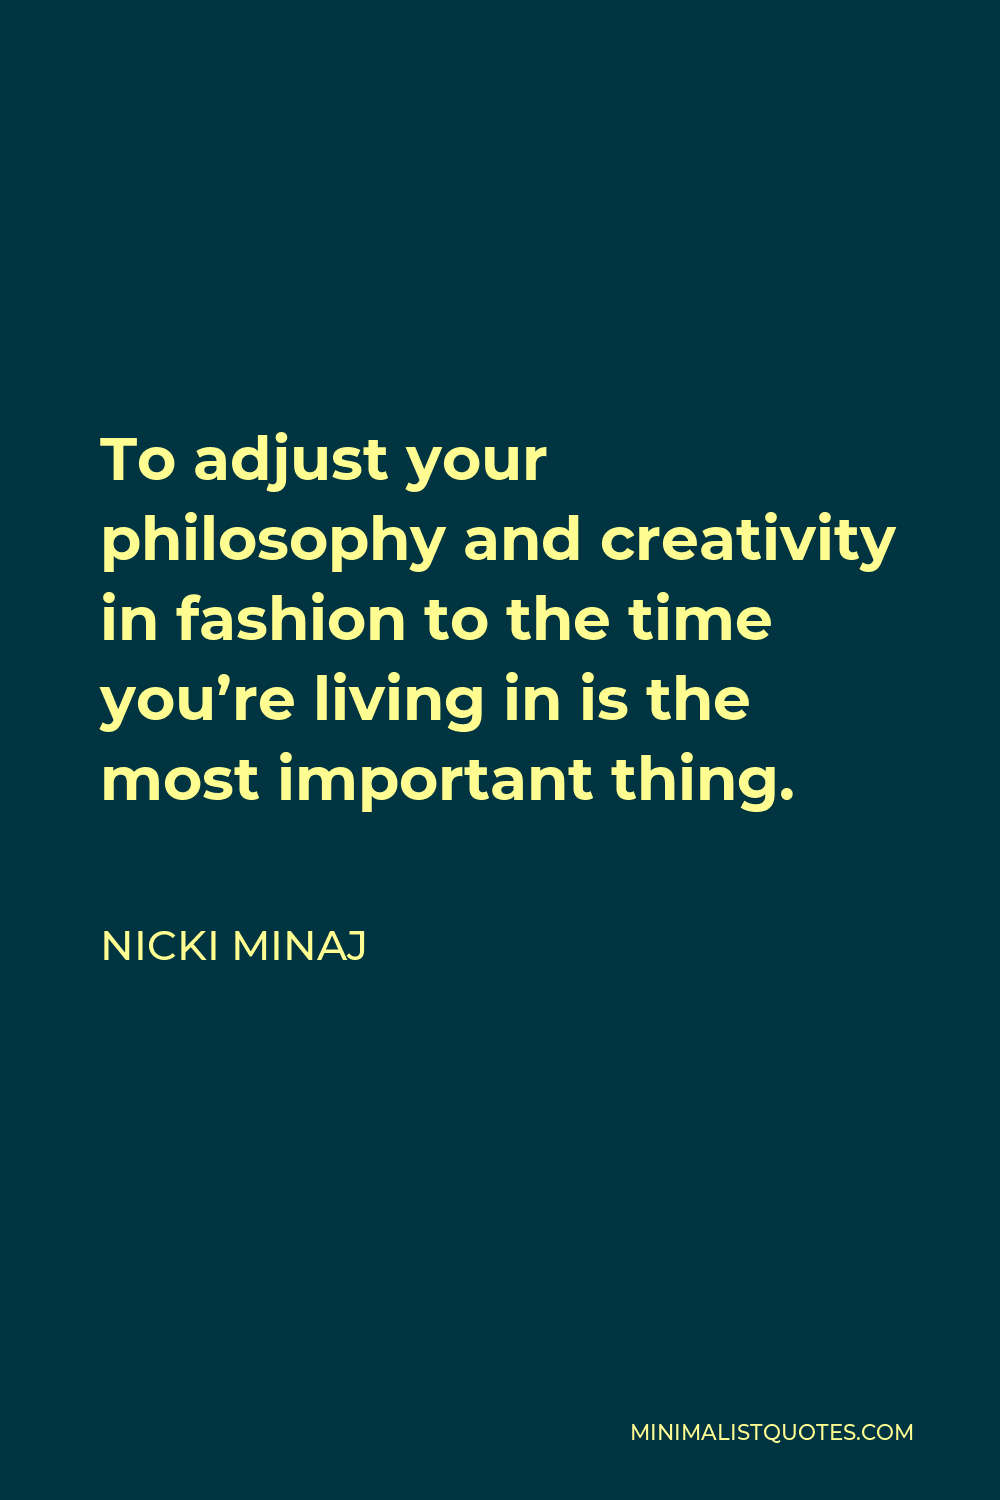 Nicki Minaj Quote: To adjust your philosophy and creativity in fashion to  the time you're living in is the most important thing.